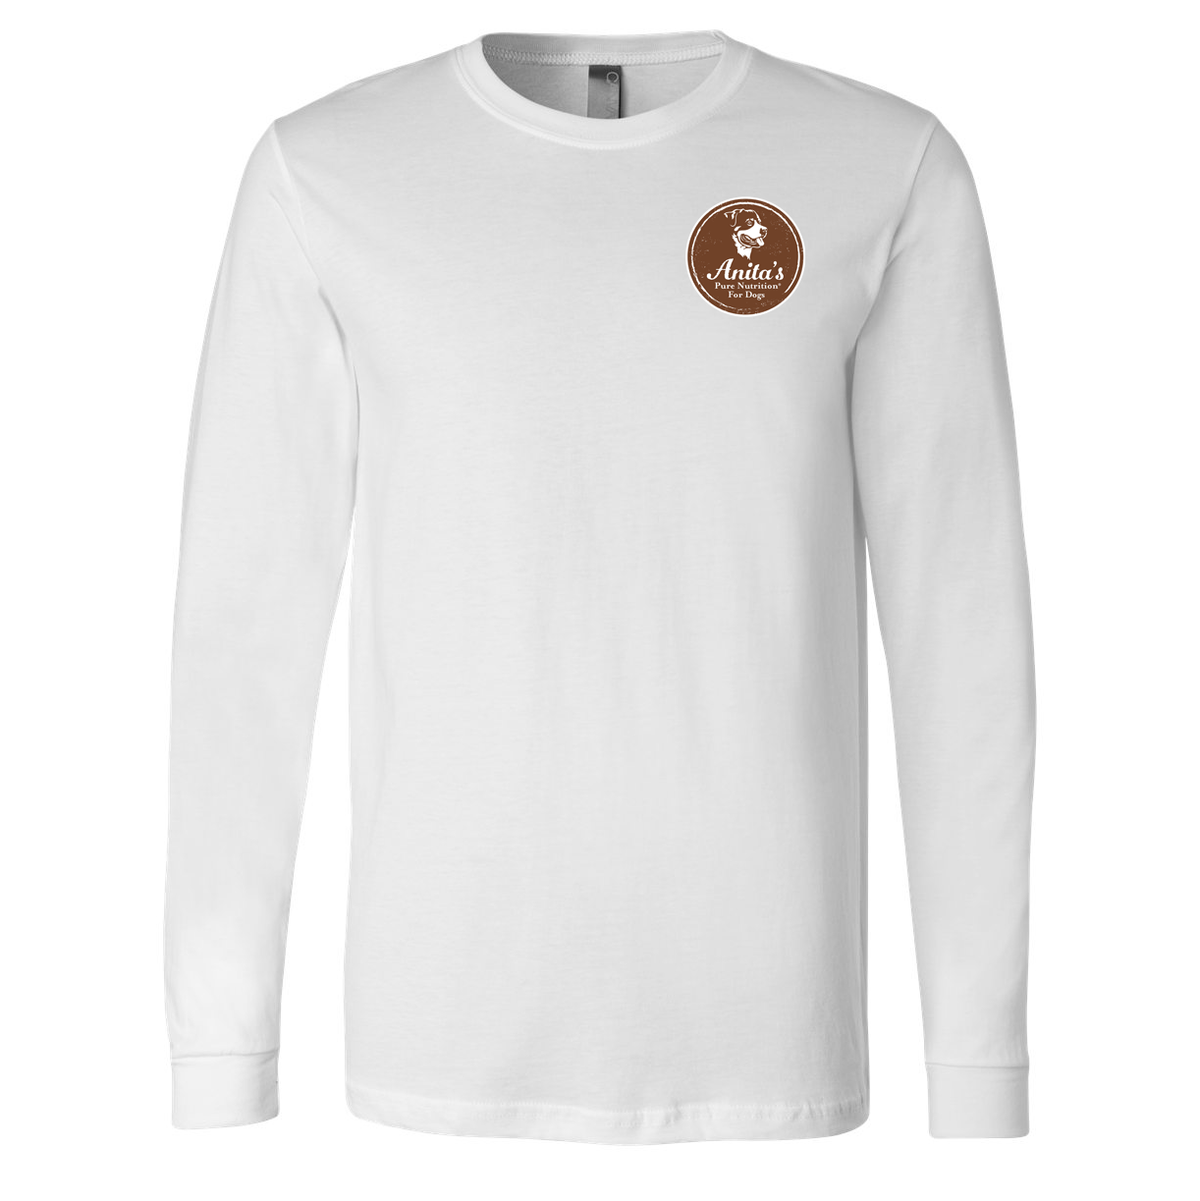 Anita's Pure Nutrition For Dogs Long Sleeve Tee